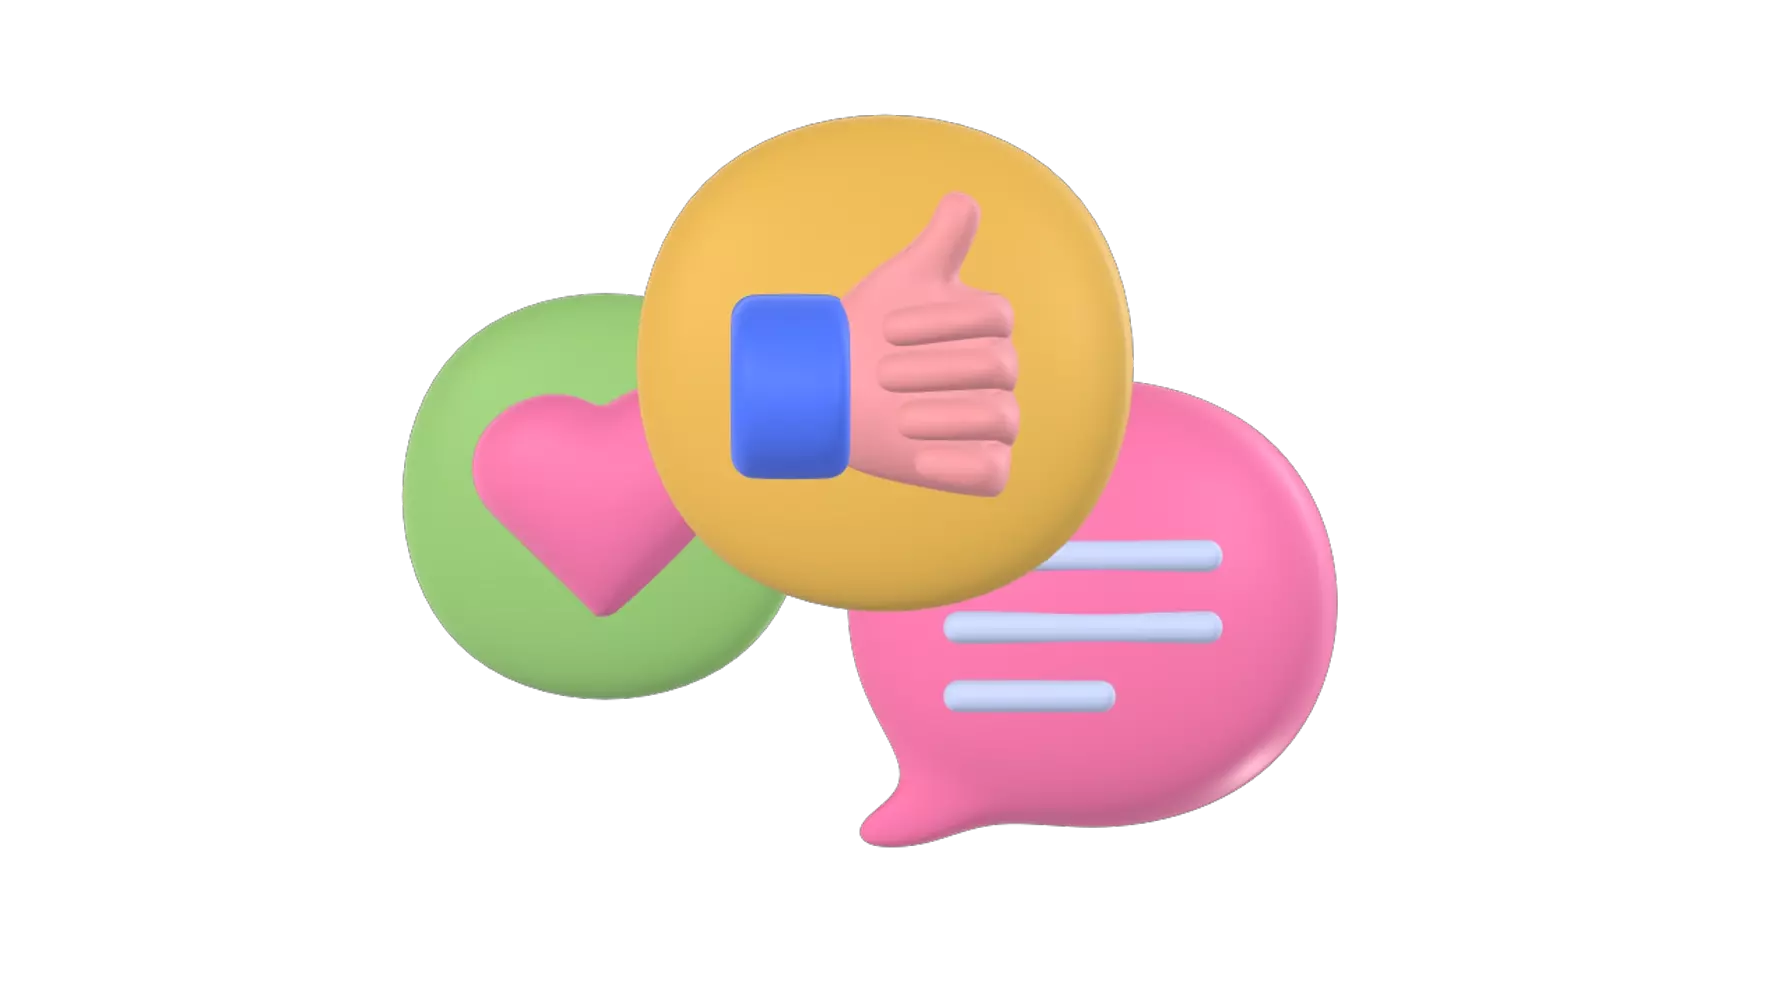 Thumbs Up 3D Graphic